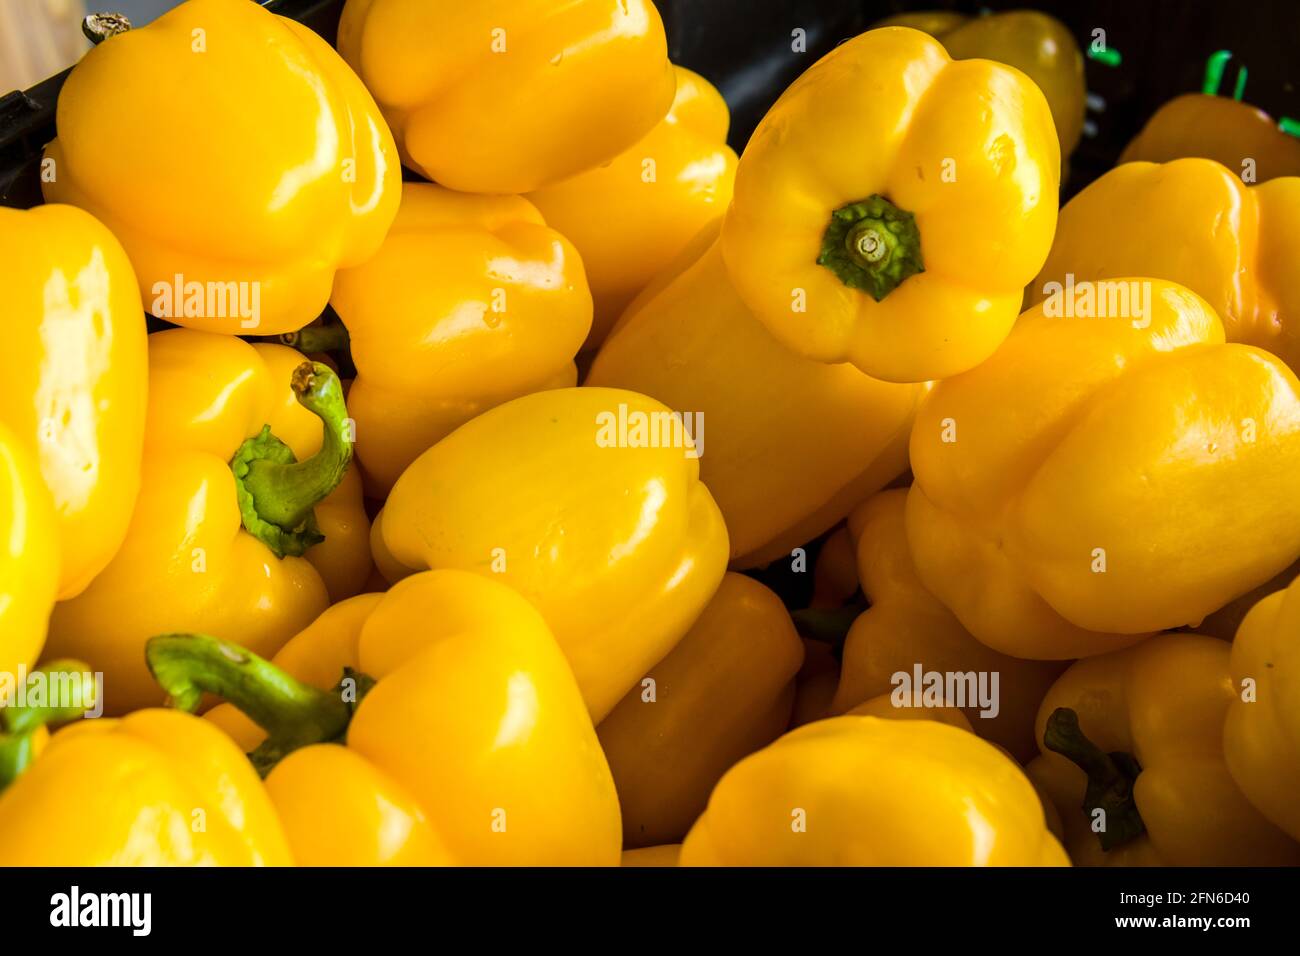 Georgia on My Mind - Union County Farmers Market - Yellow Bell Peppers Stock Photo